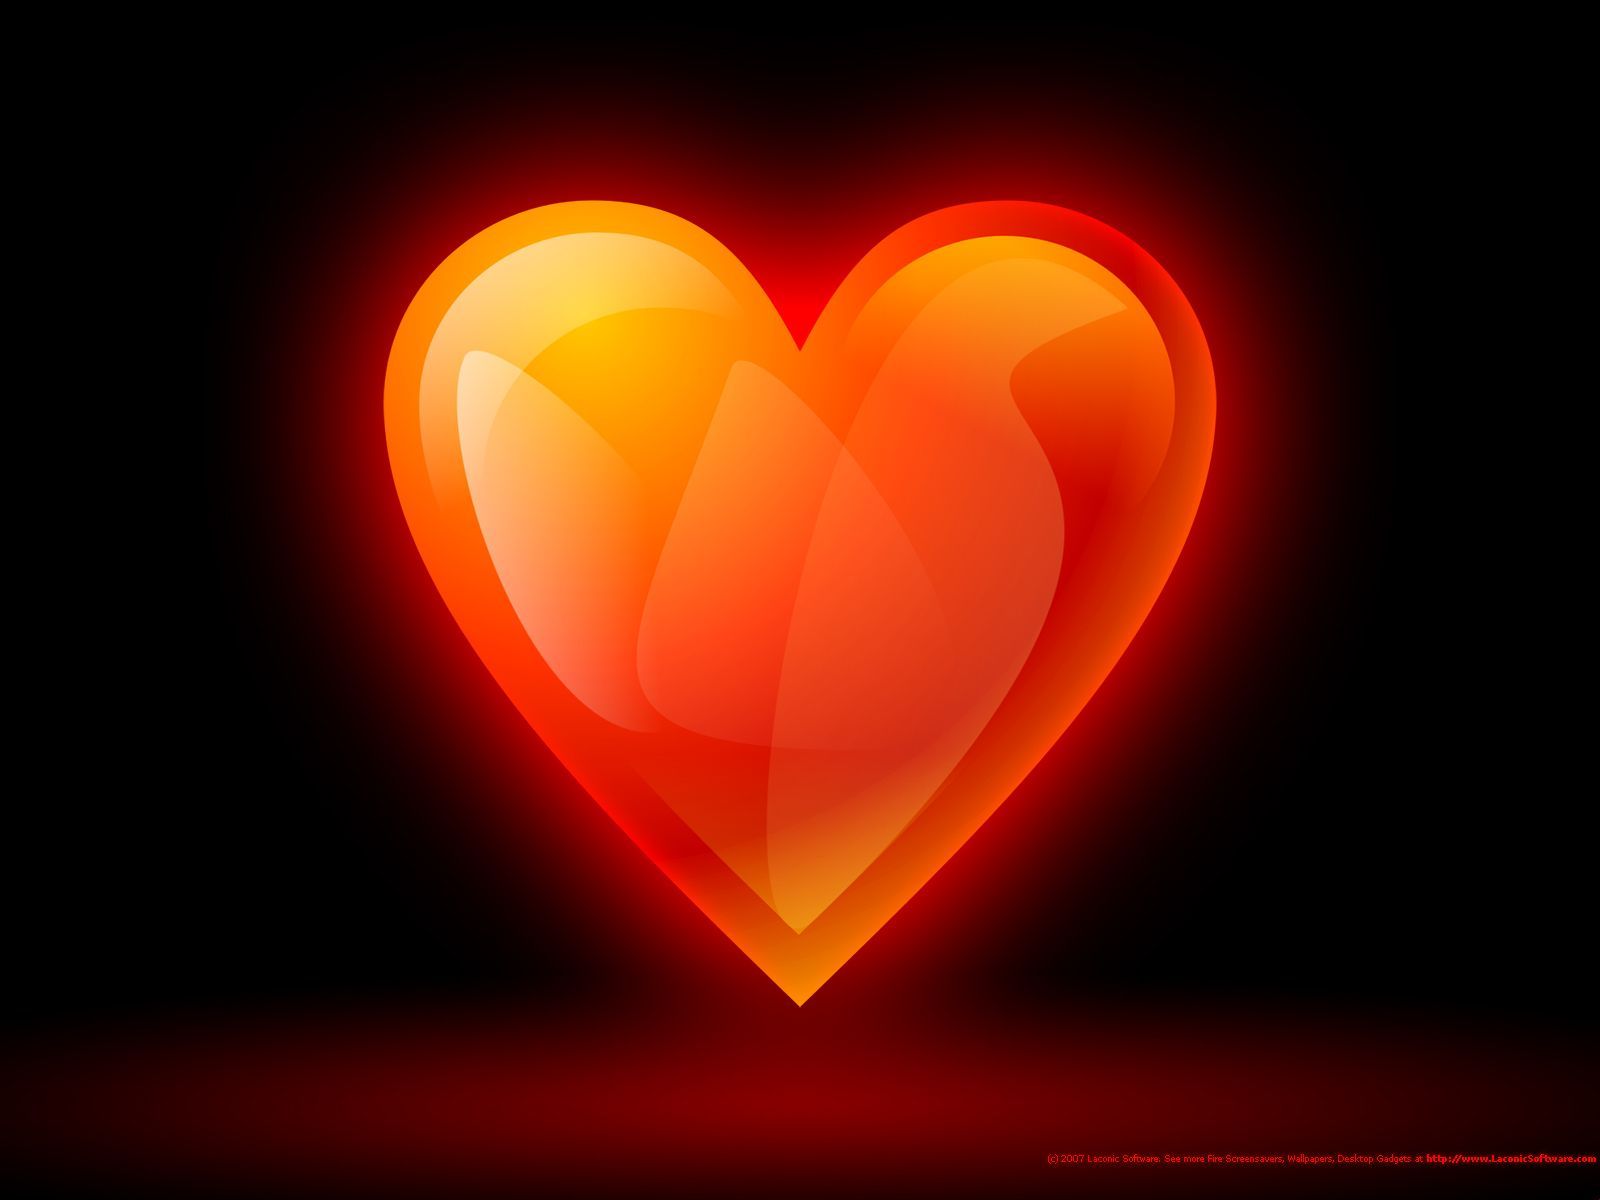 Free Orange and Yellow Heart Wallpaper Background Image